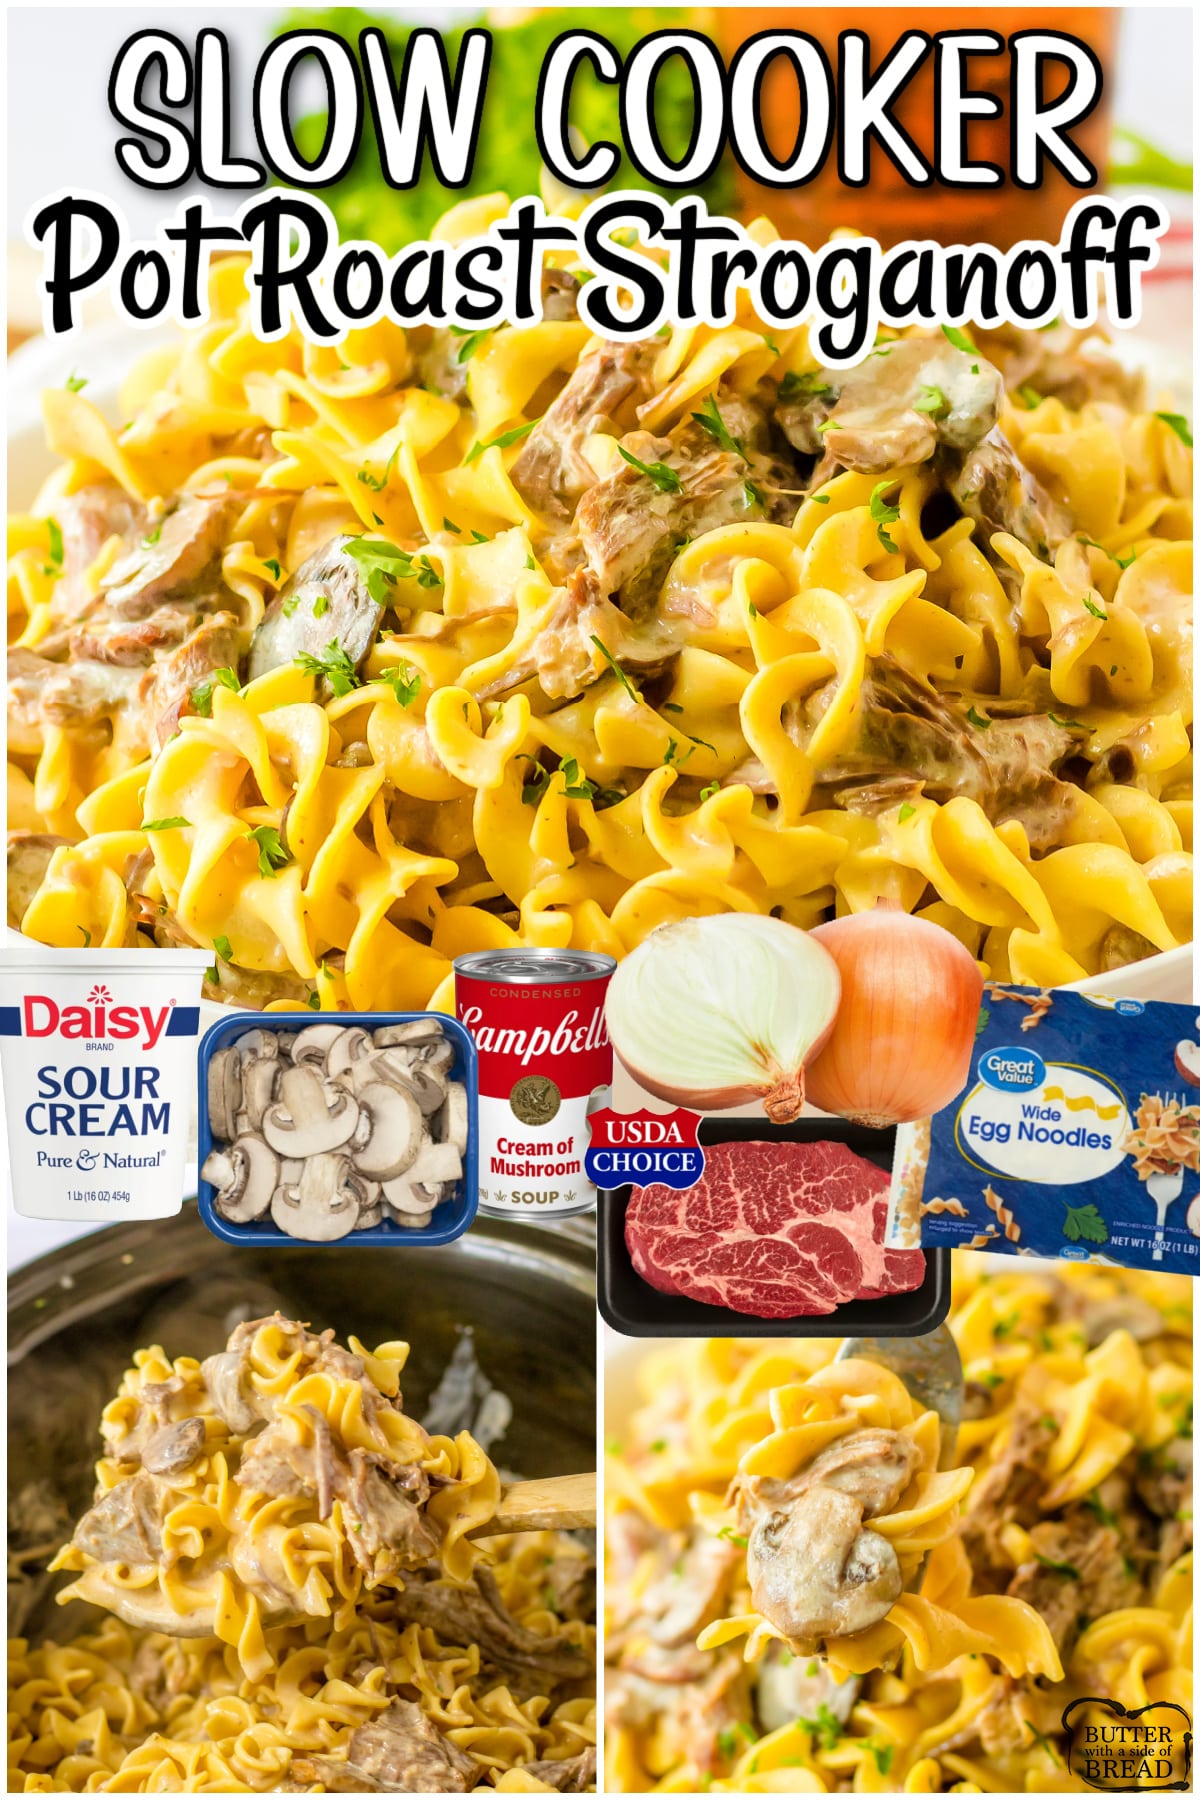 Slow Cooker Pot Roast Stroganoff is a hearty, comforting meal perfect for weeknight dinner! Beef roast & mushrooms slowly cook until fall-apart tender, then combine with sour cream & served on egg noodles for a delicious dish.